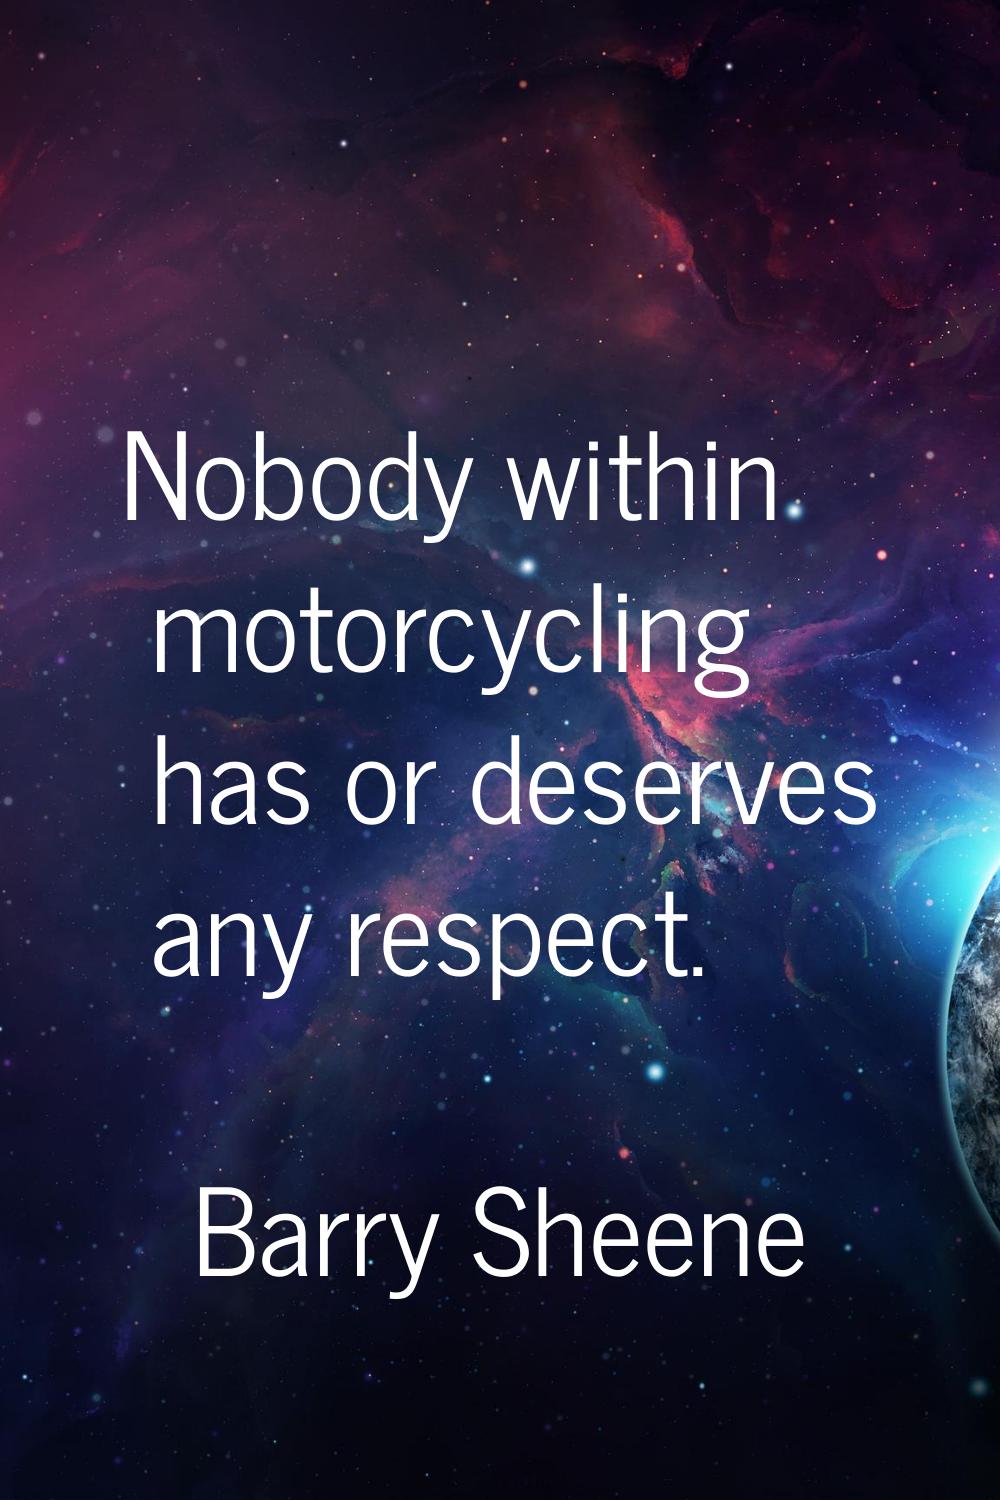 Nobody within motorcycling has or deserves any respect.